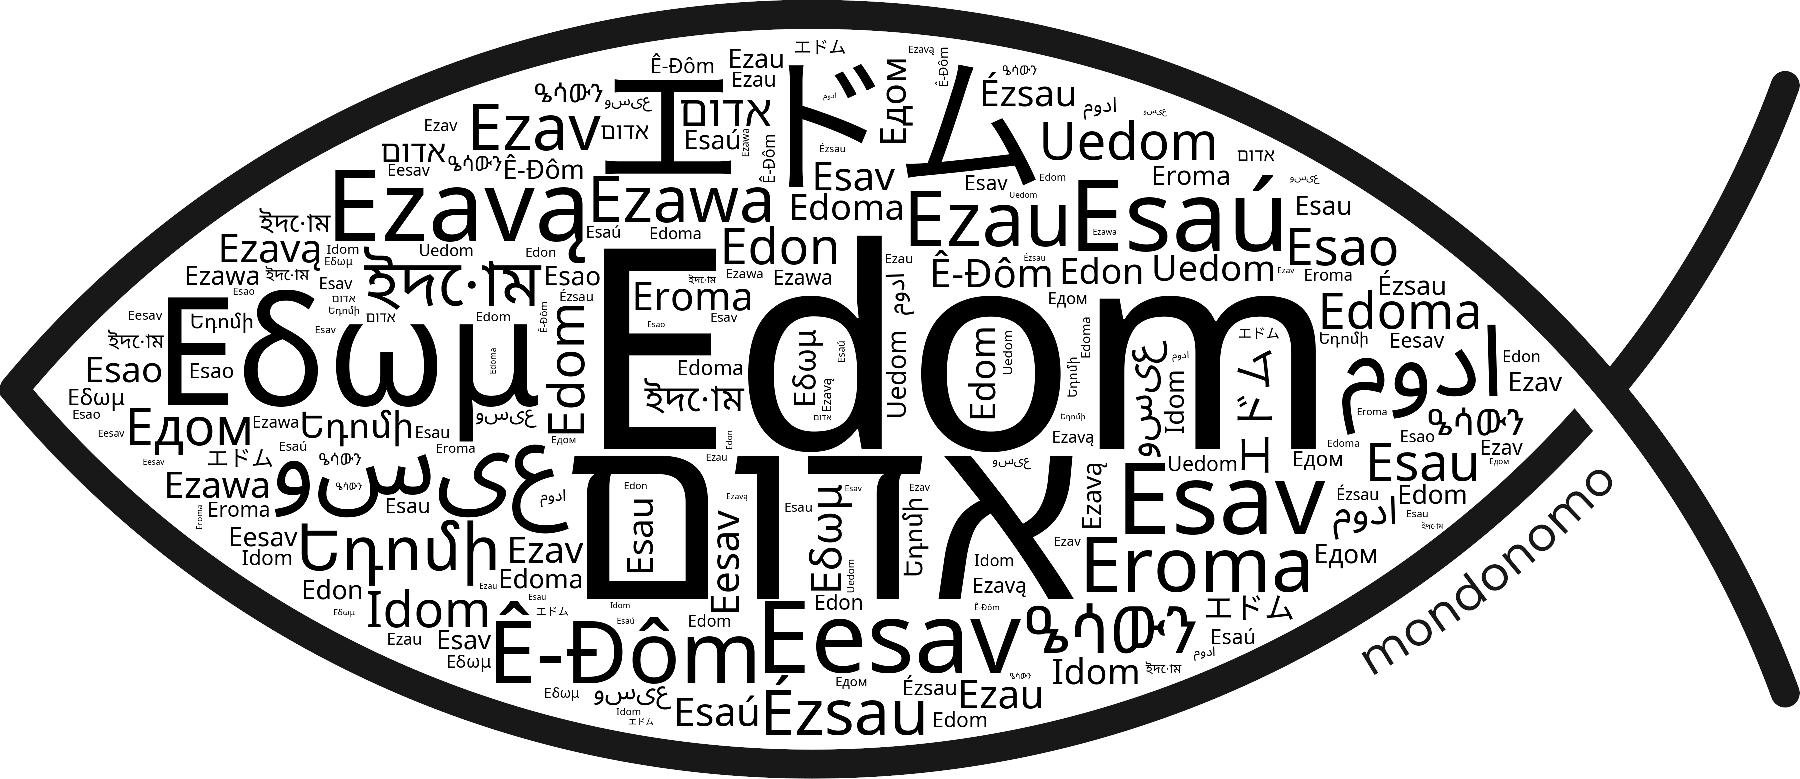 Name Edom in the world's Bibles